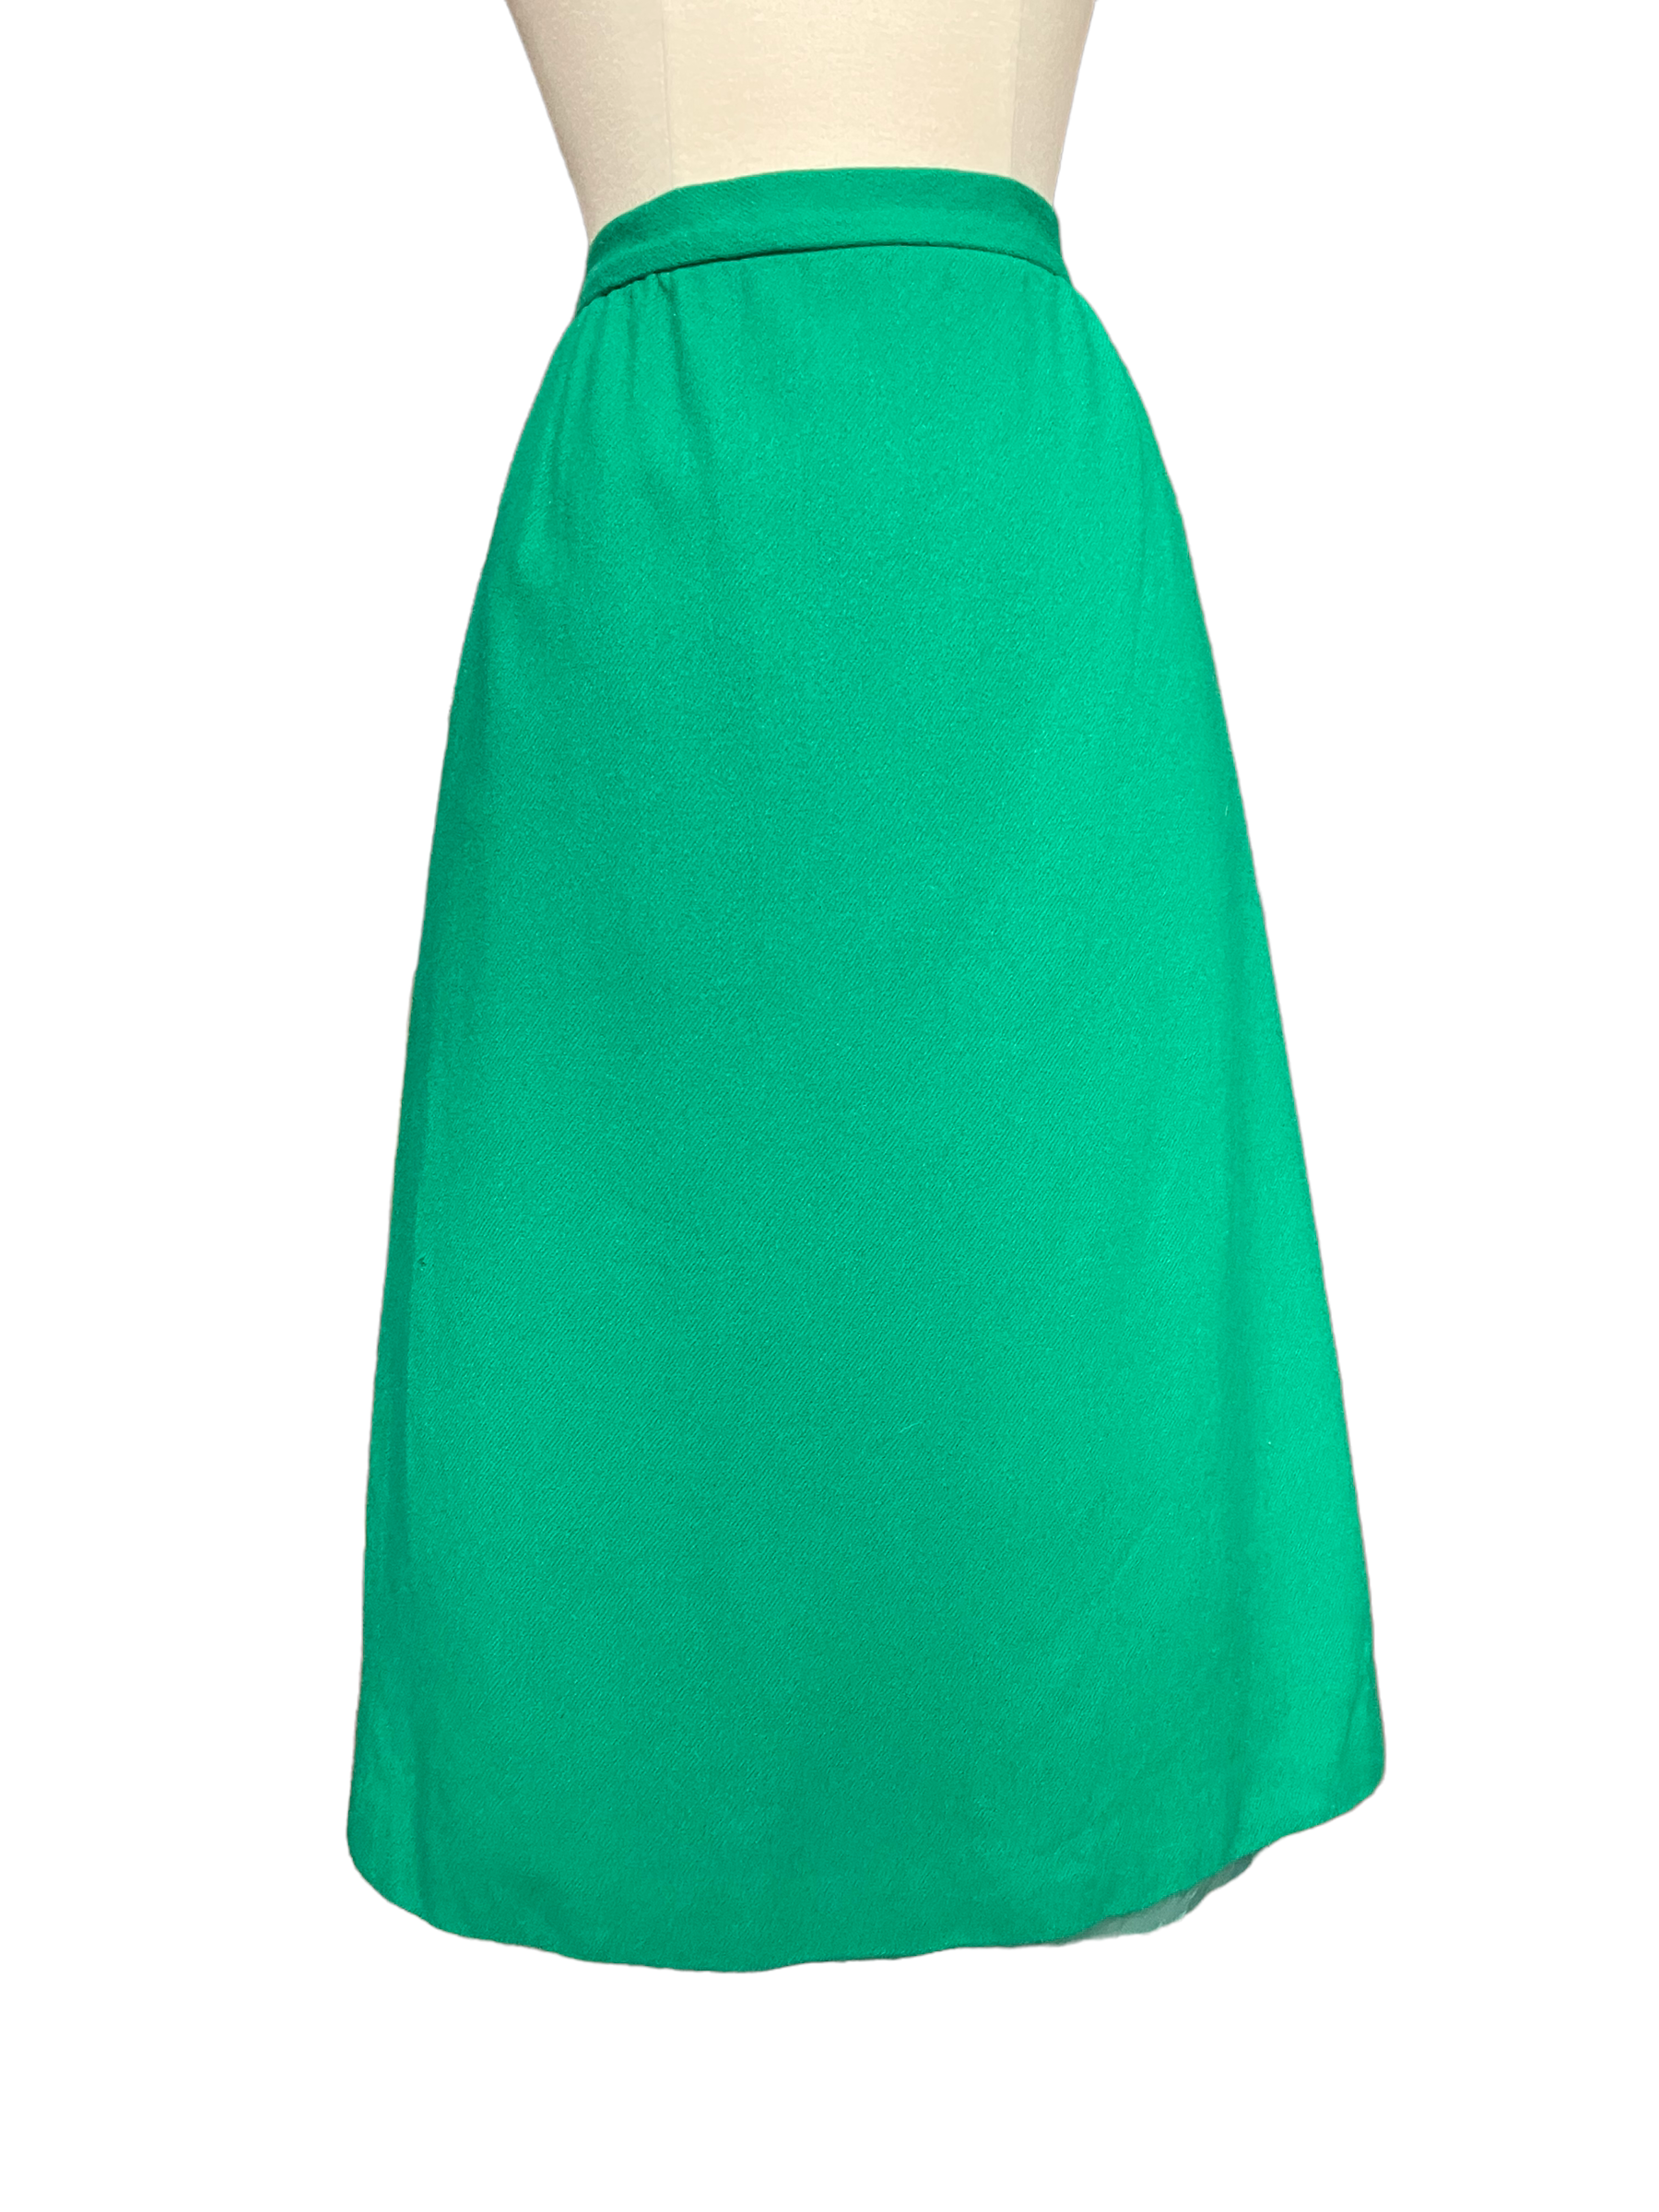 Full front view of Vintage 1960s Green Wool Pencil Skirt | Barn Owl Vintage | Seattle Vintage Skirts